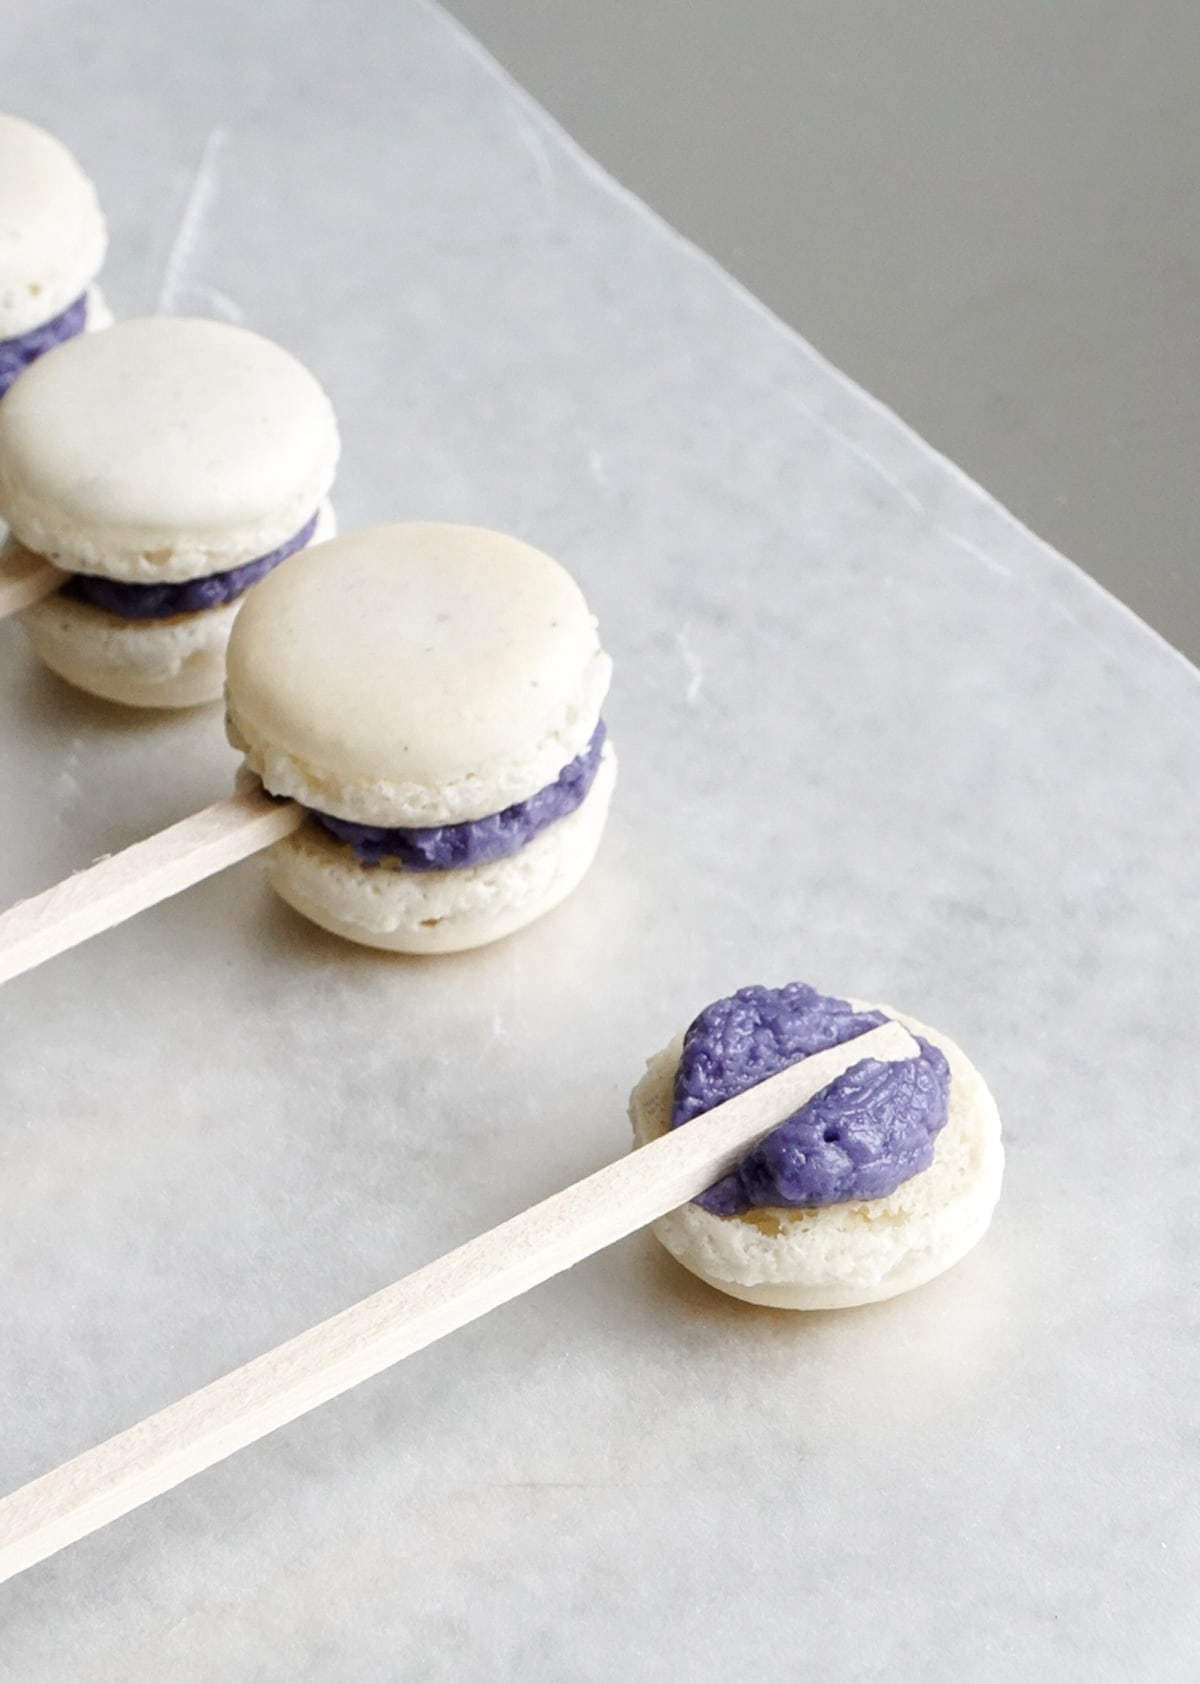 The cutest mini macaron cockail swizzle sticks for garnishing and eating, too! - Sugar and Cloth - houston blogger